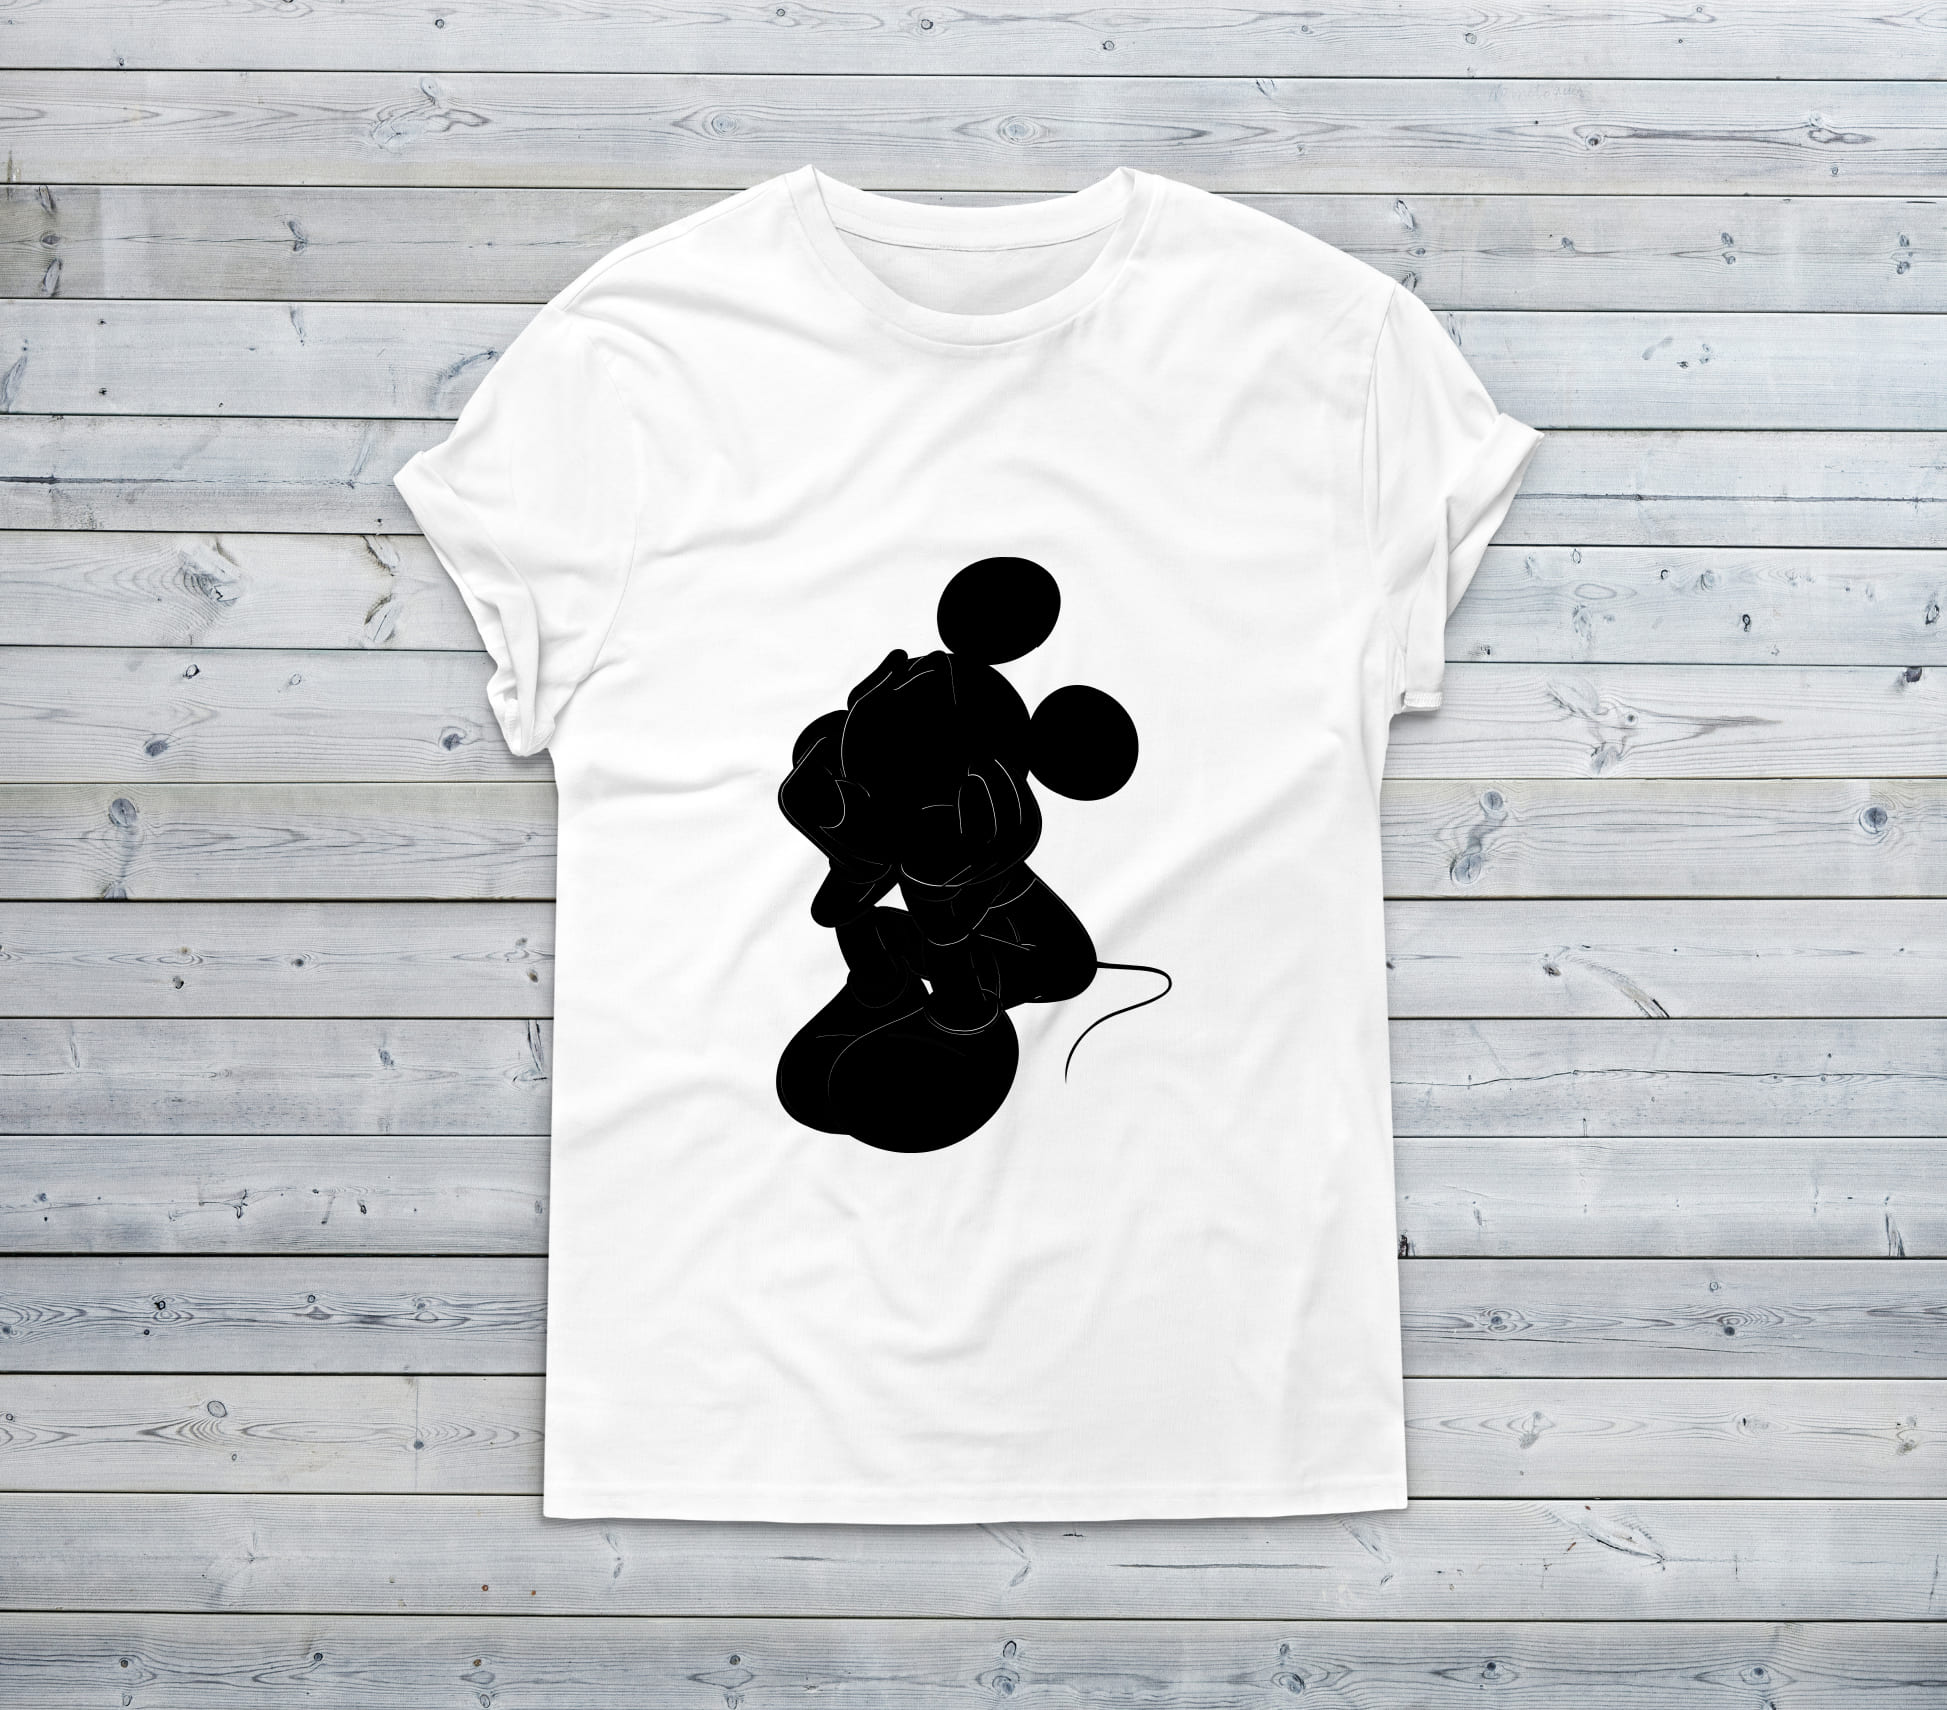 Pensive mickey mouse in the silhouette style.